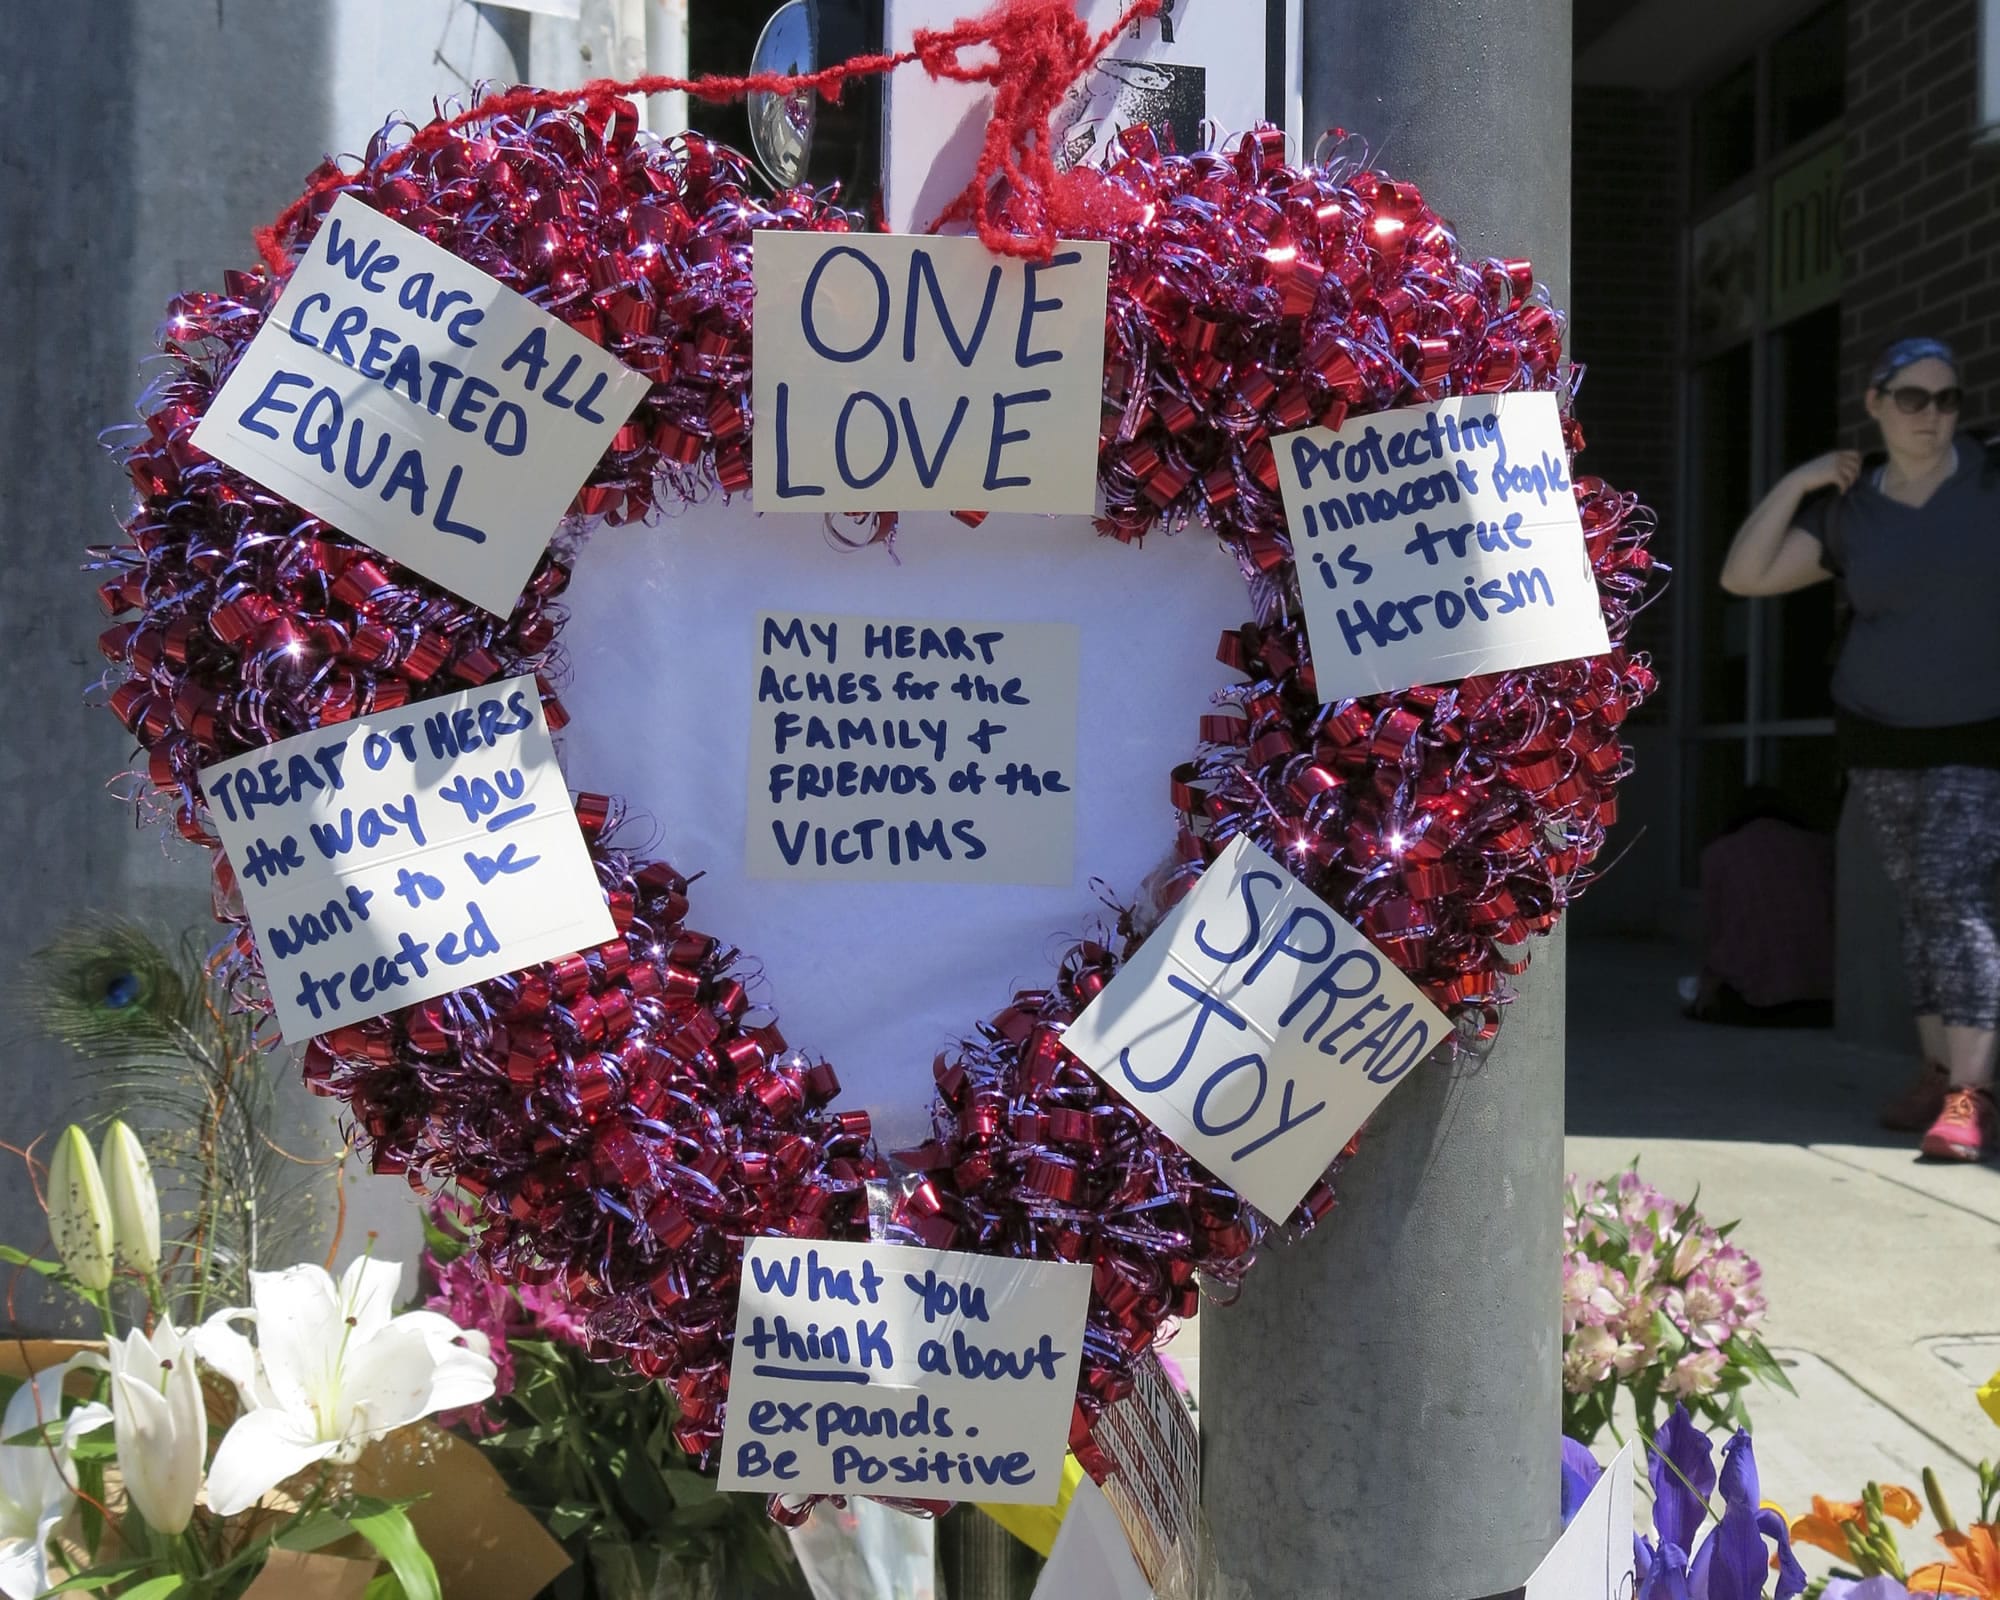 A heart-shaped wreath covered with positive messages hangs on a traffic light pole at a memorial for two bystanders who were stabbed to death Friday, while trying to stop a man who was yelling anti-Muslim slurs and acting aggressively toward two young women, including one wearing a Muslim head covering, on a light-trail train in Portland, Ore, Saturday, May 27, 2017. A memorial grew all day Saturday outside the transit center in Portland, as people stopped with flowers, candles, signs and painted rocks. Jeremy Joseph Christian, 35, was booked on suspicion of murder and attempted murder in the attack.